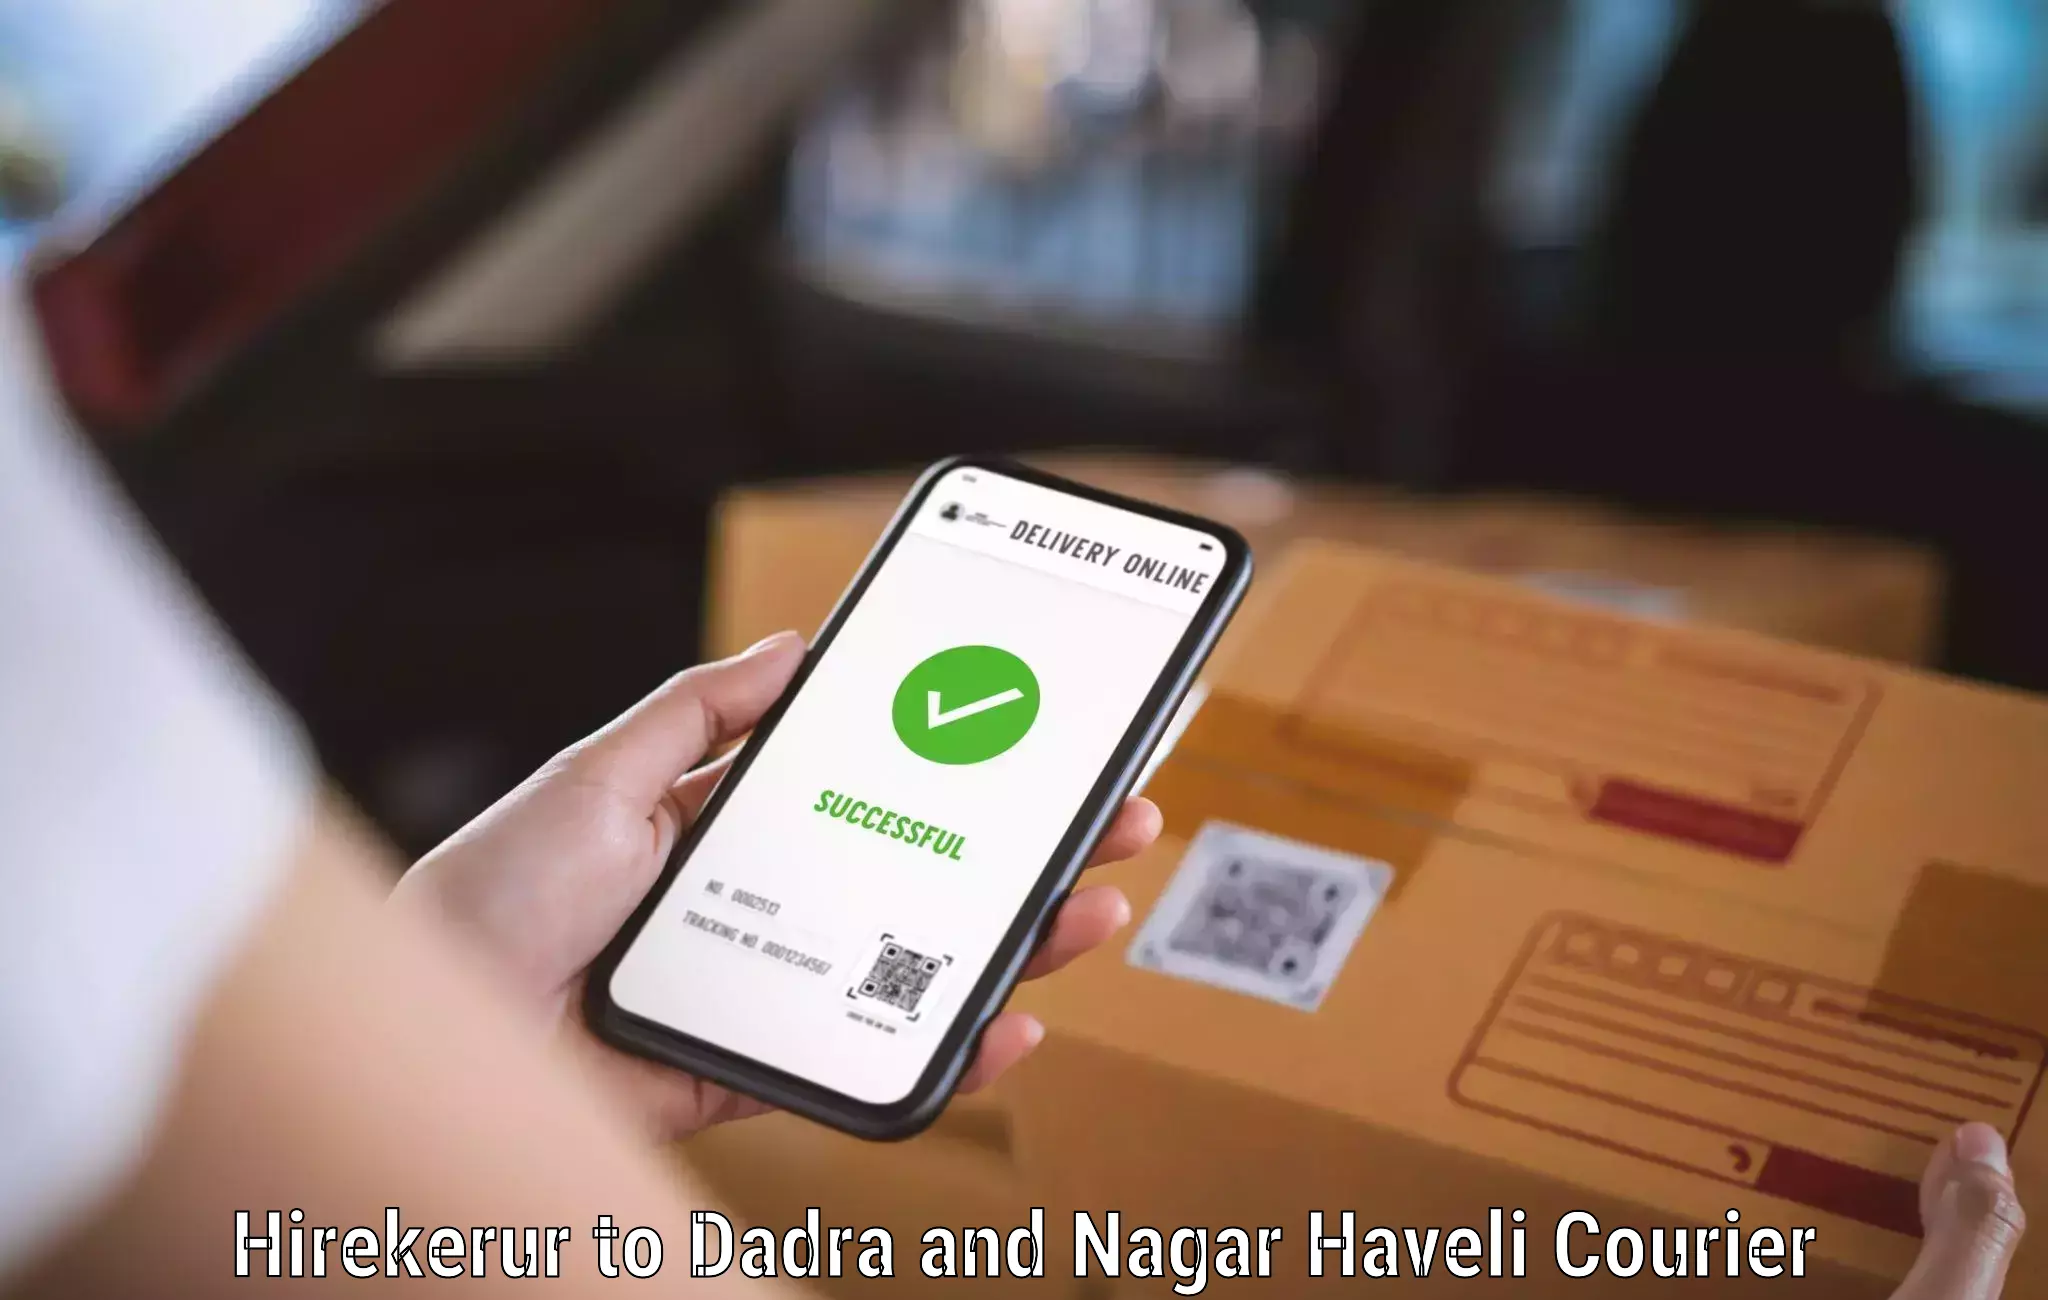 Express delivery capabilities Hirekerur to Dadra and Nagar Haveli